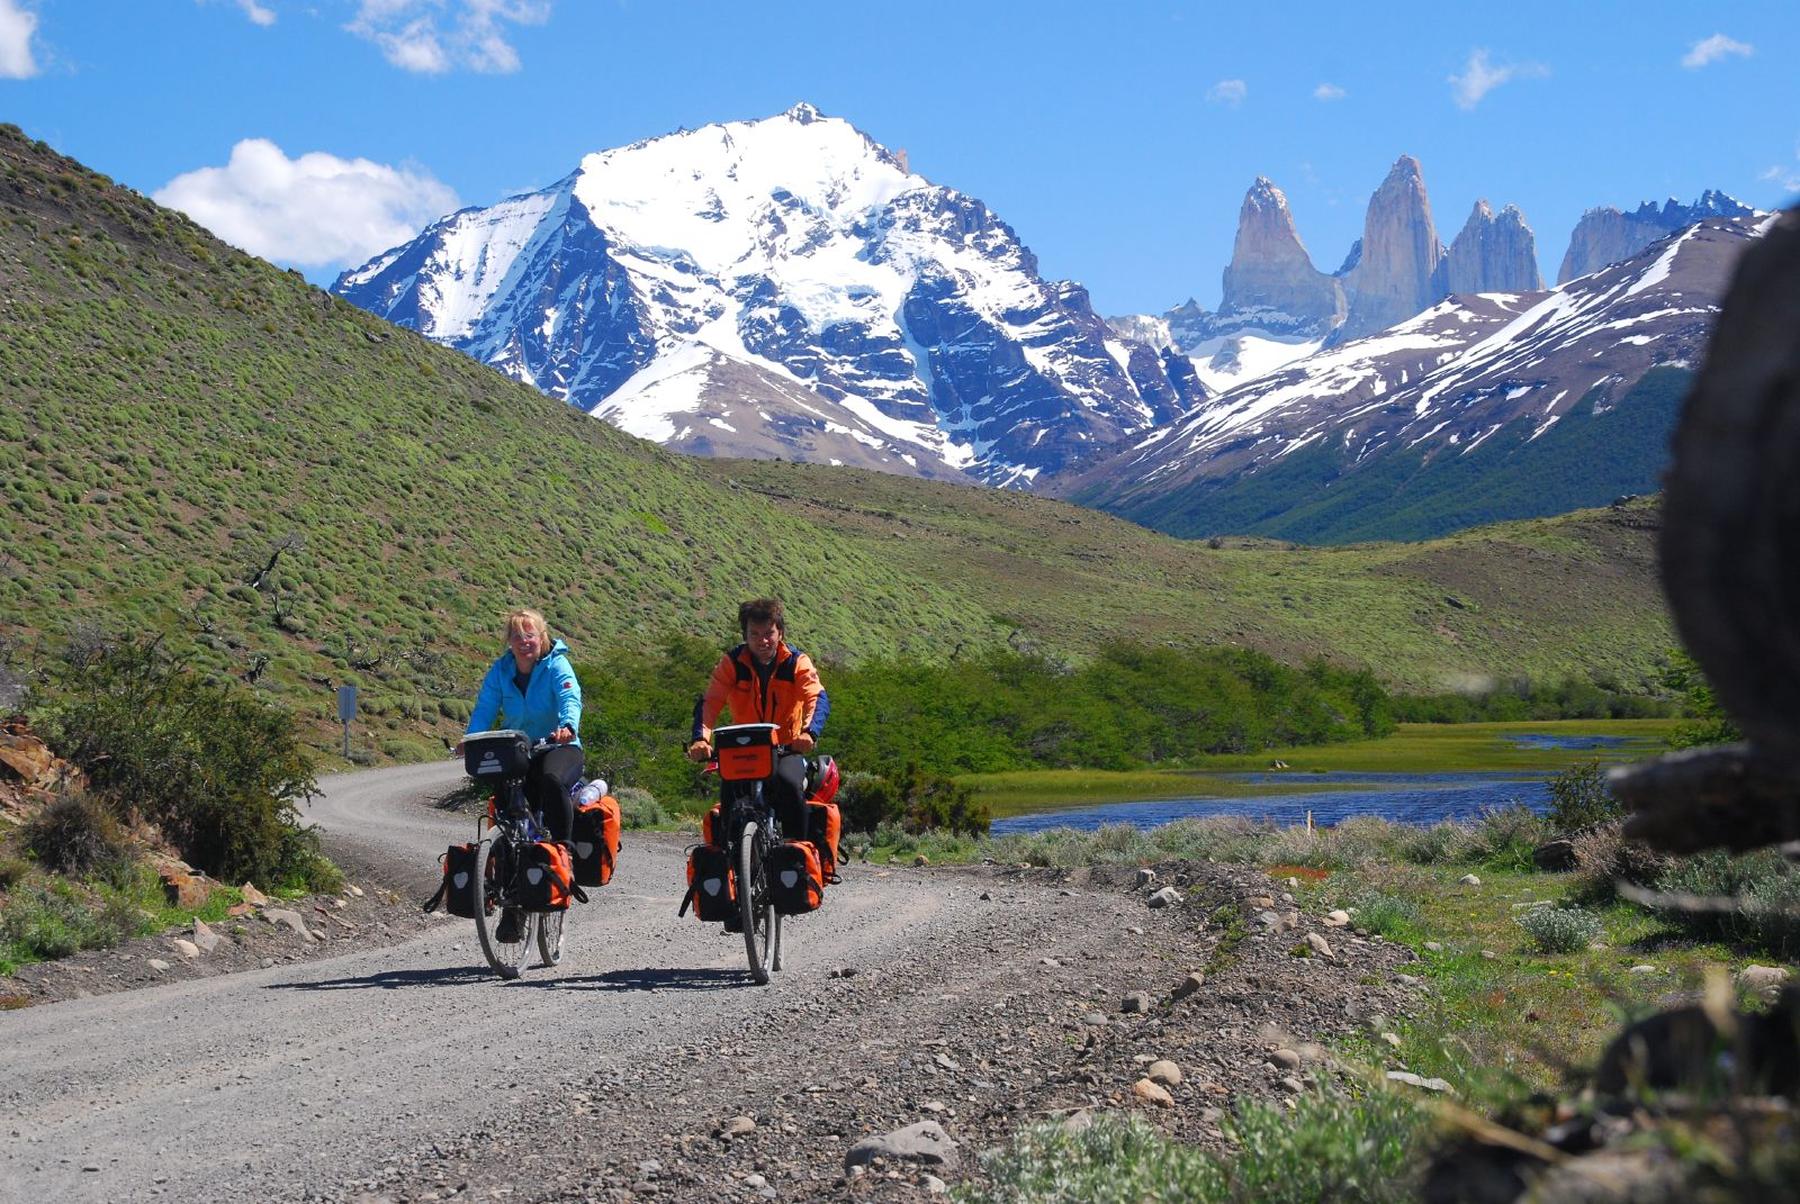 two people riding bikes on a trail through the mountains - File:027 Cycling Torres del Paine.jpg